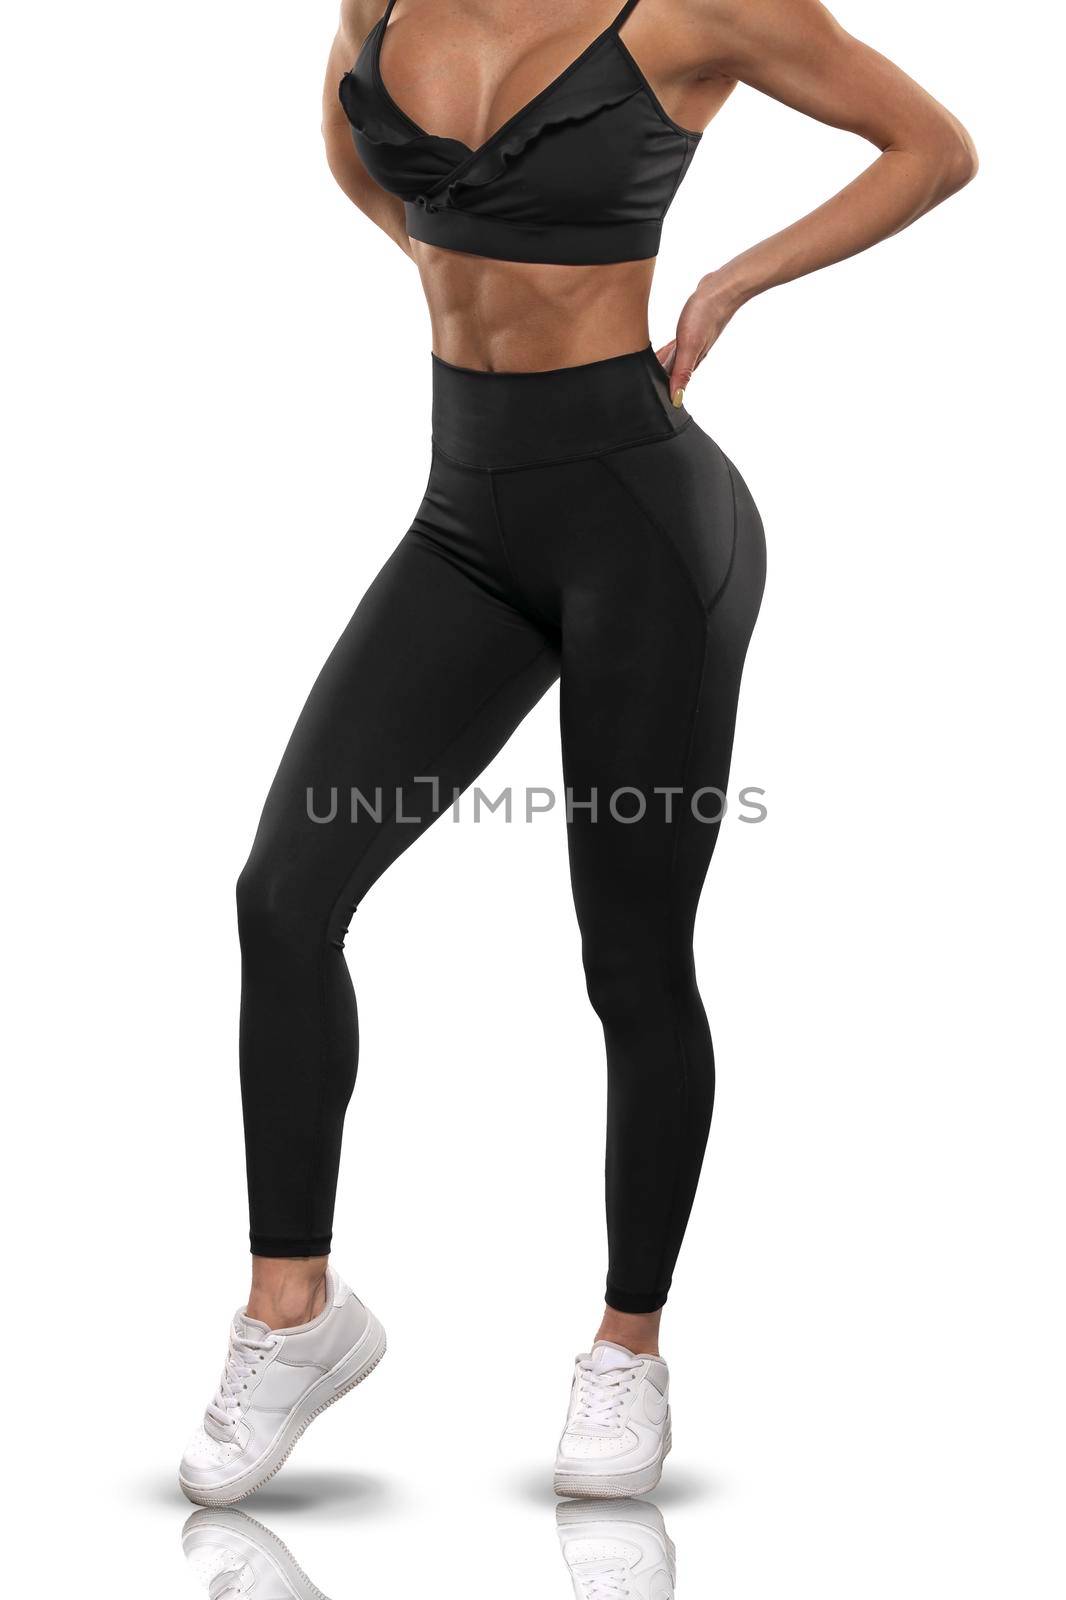 Legs girl in black leggings and a top on a white background by but_photo